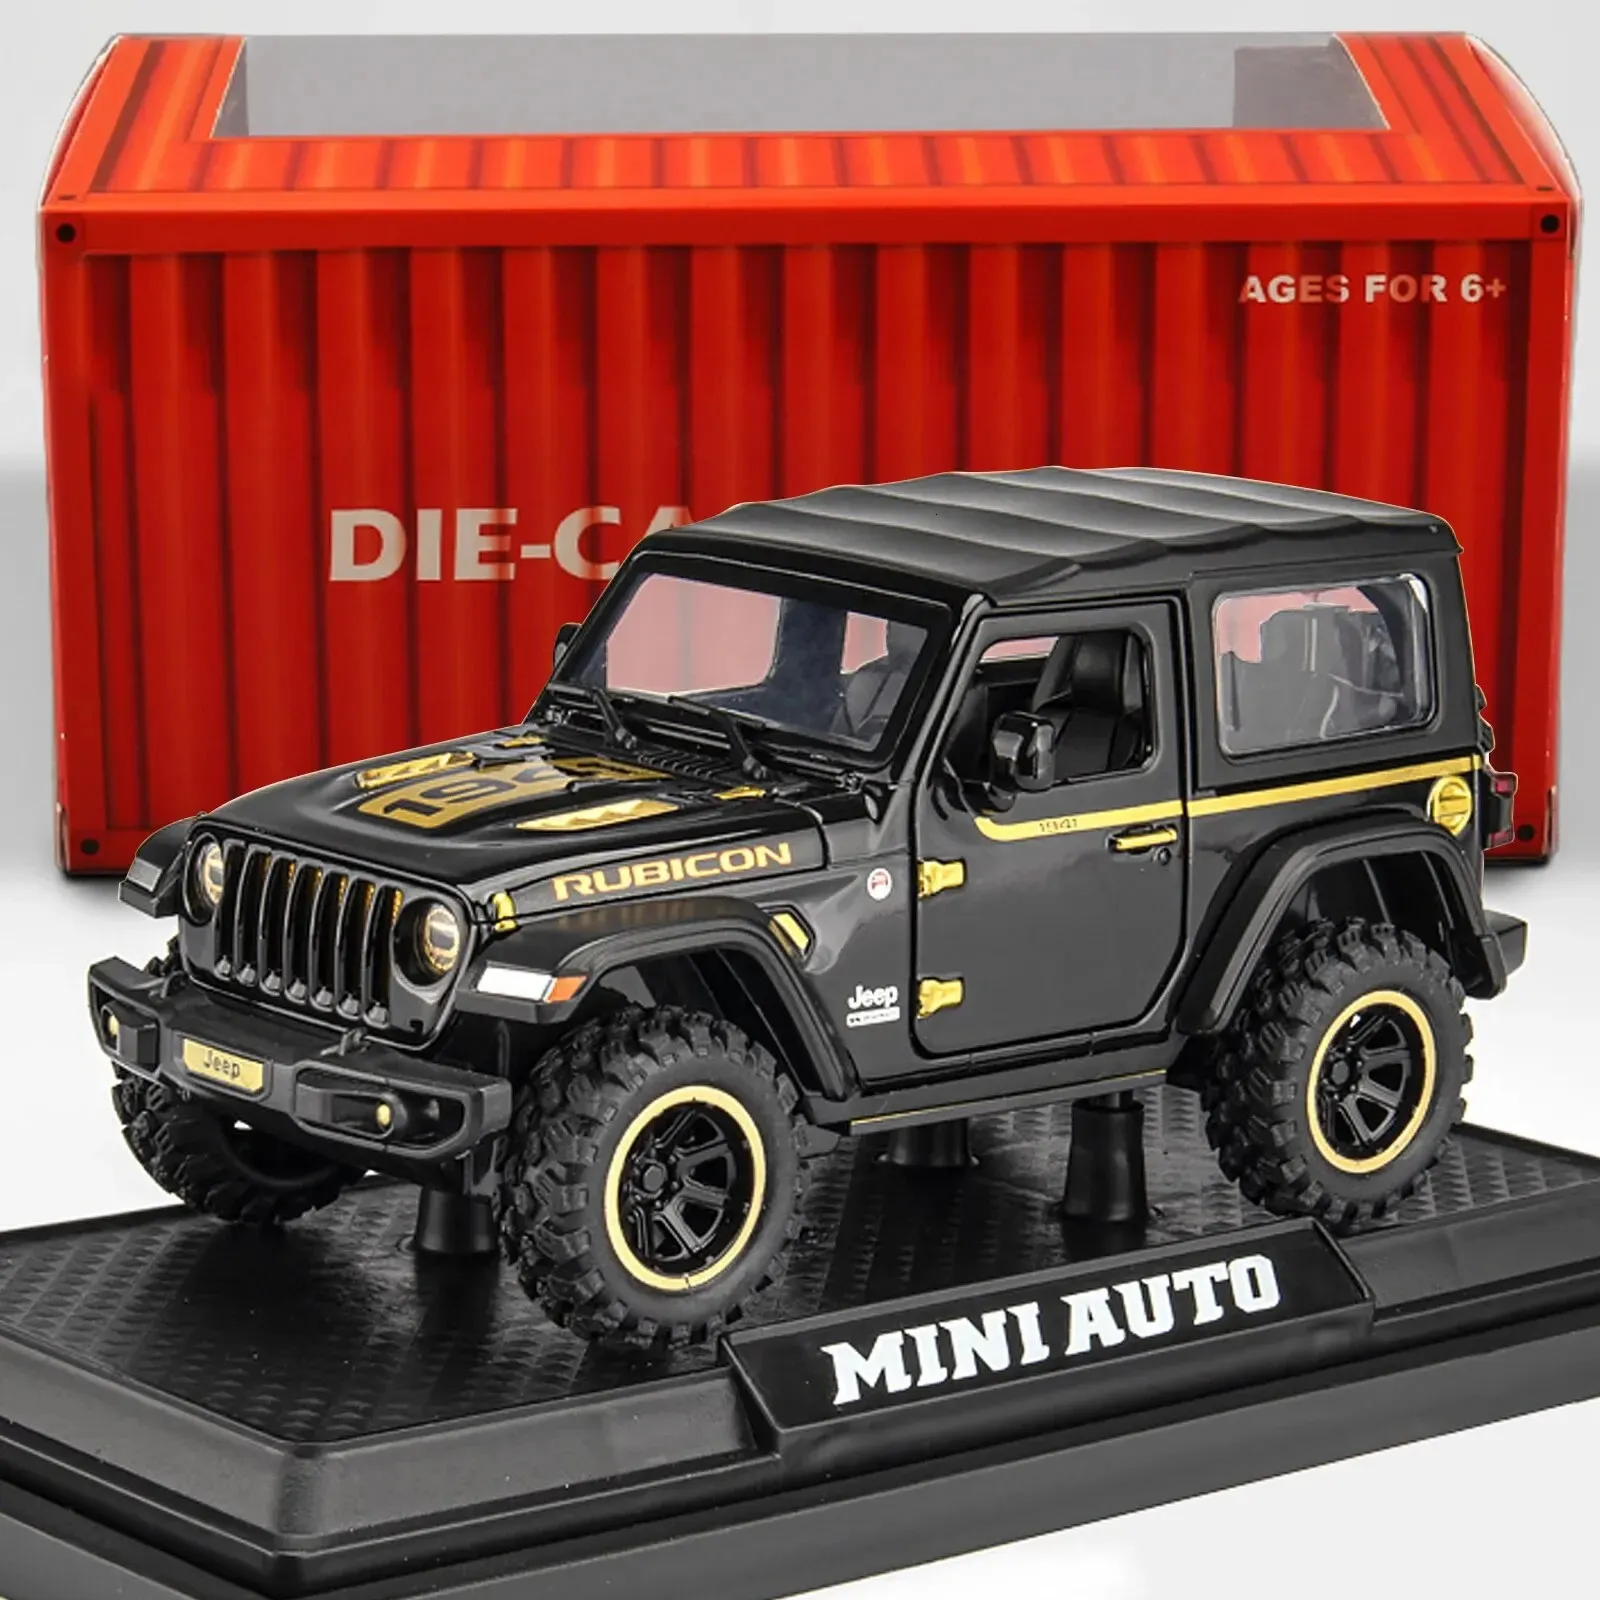 OffRoad 7 Door for Diecast Toy Car Model 132 Scale Metal Alloy Vehicle for Kids Boys Girls Adults Doors Open Light 240409